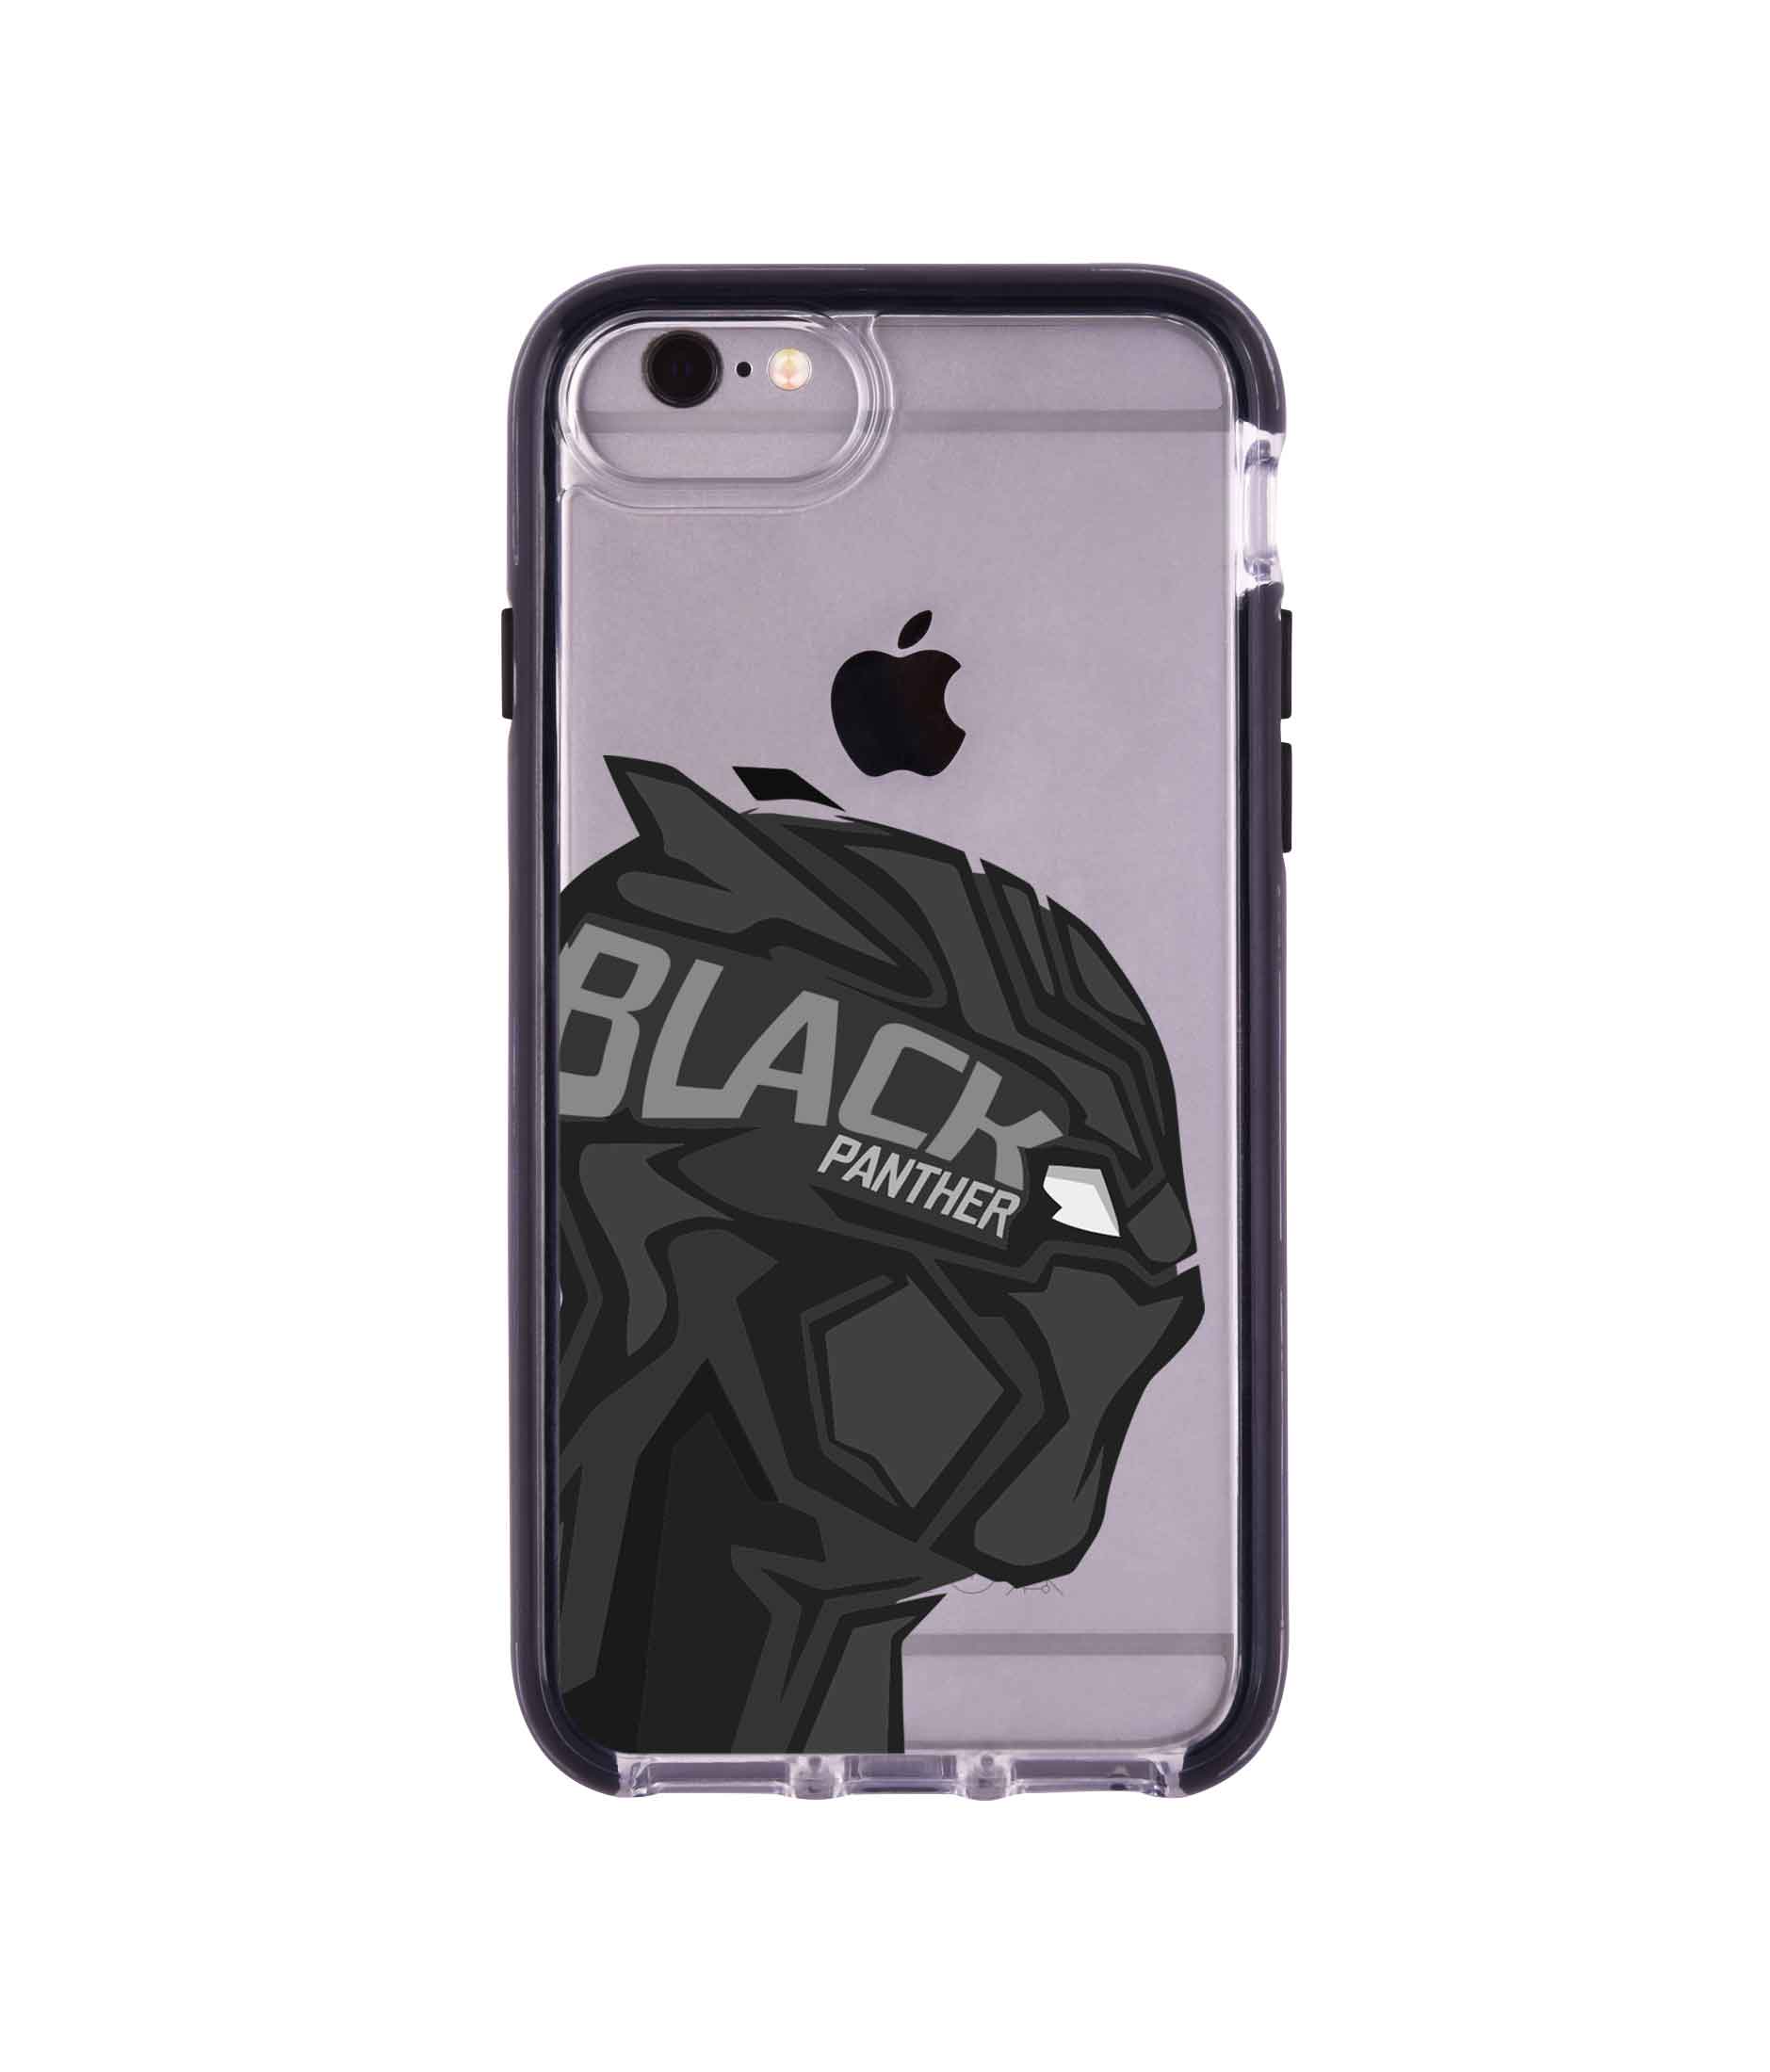 Black Panther Art - Extreme Phone Case for iPhone 6